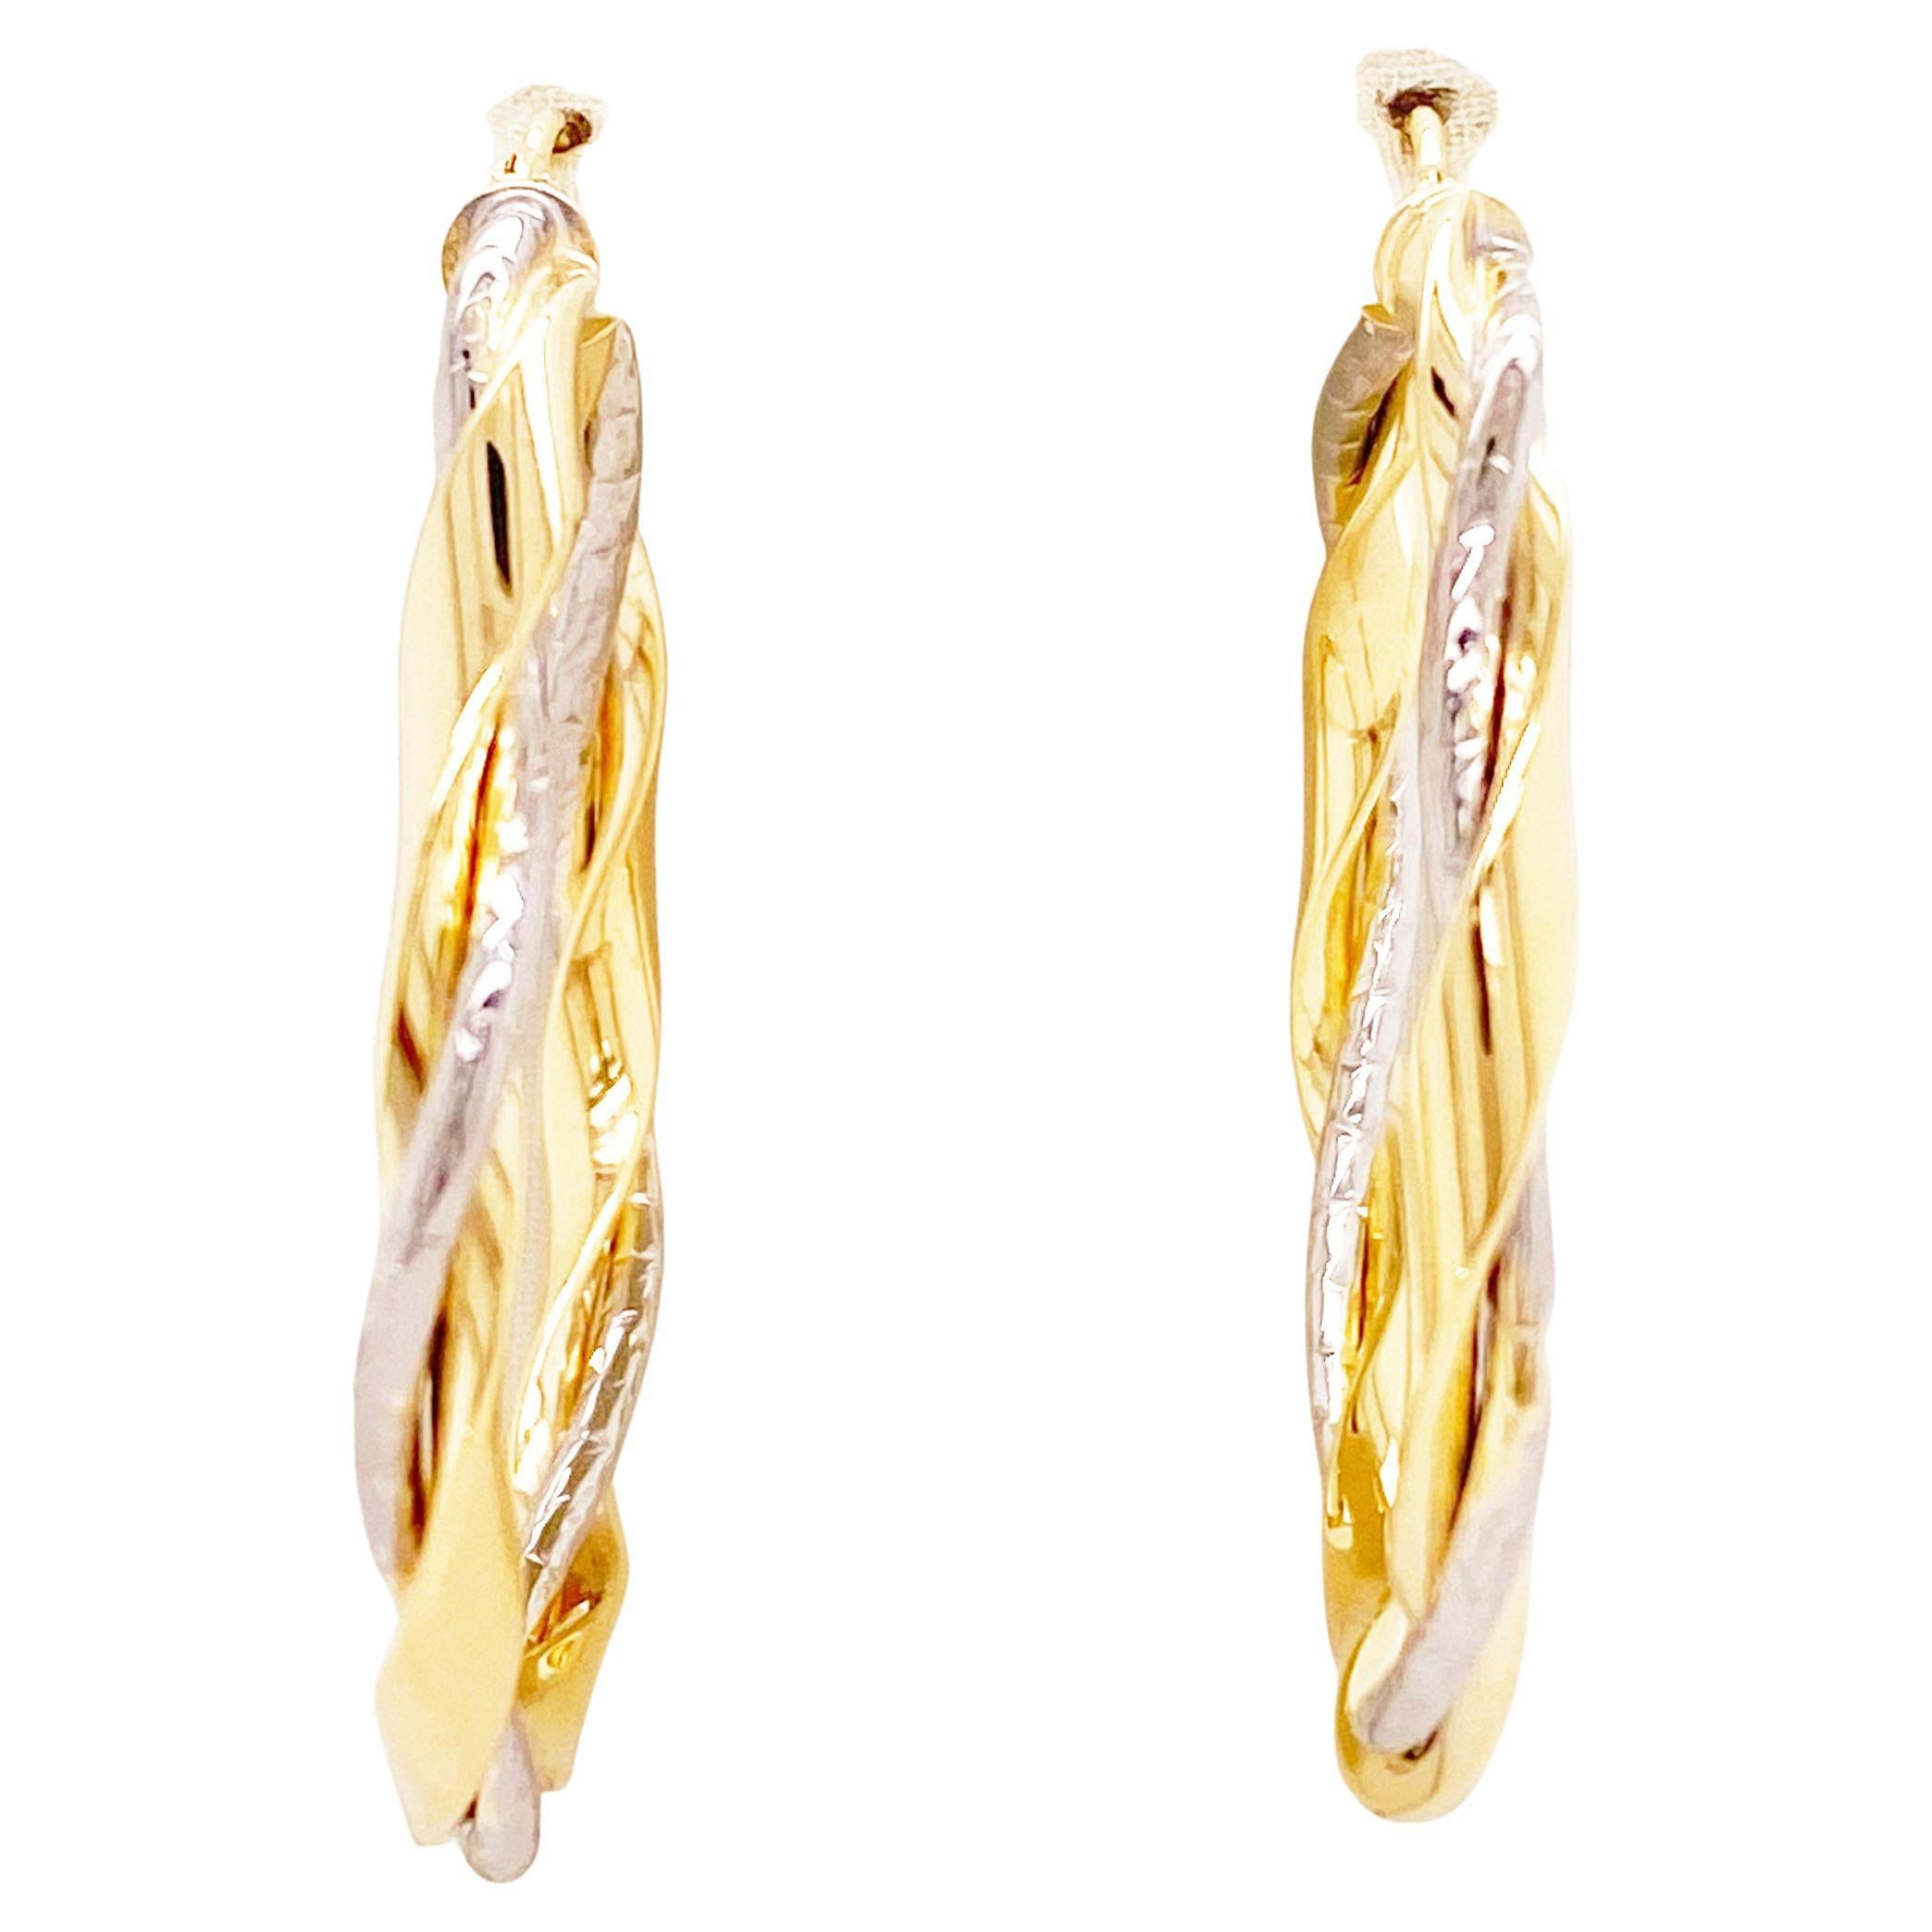 Twisted Hoop Earrings, Textured Two-Tone 14K Mixed Metal Yellow-White Gold